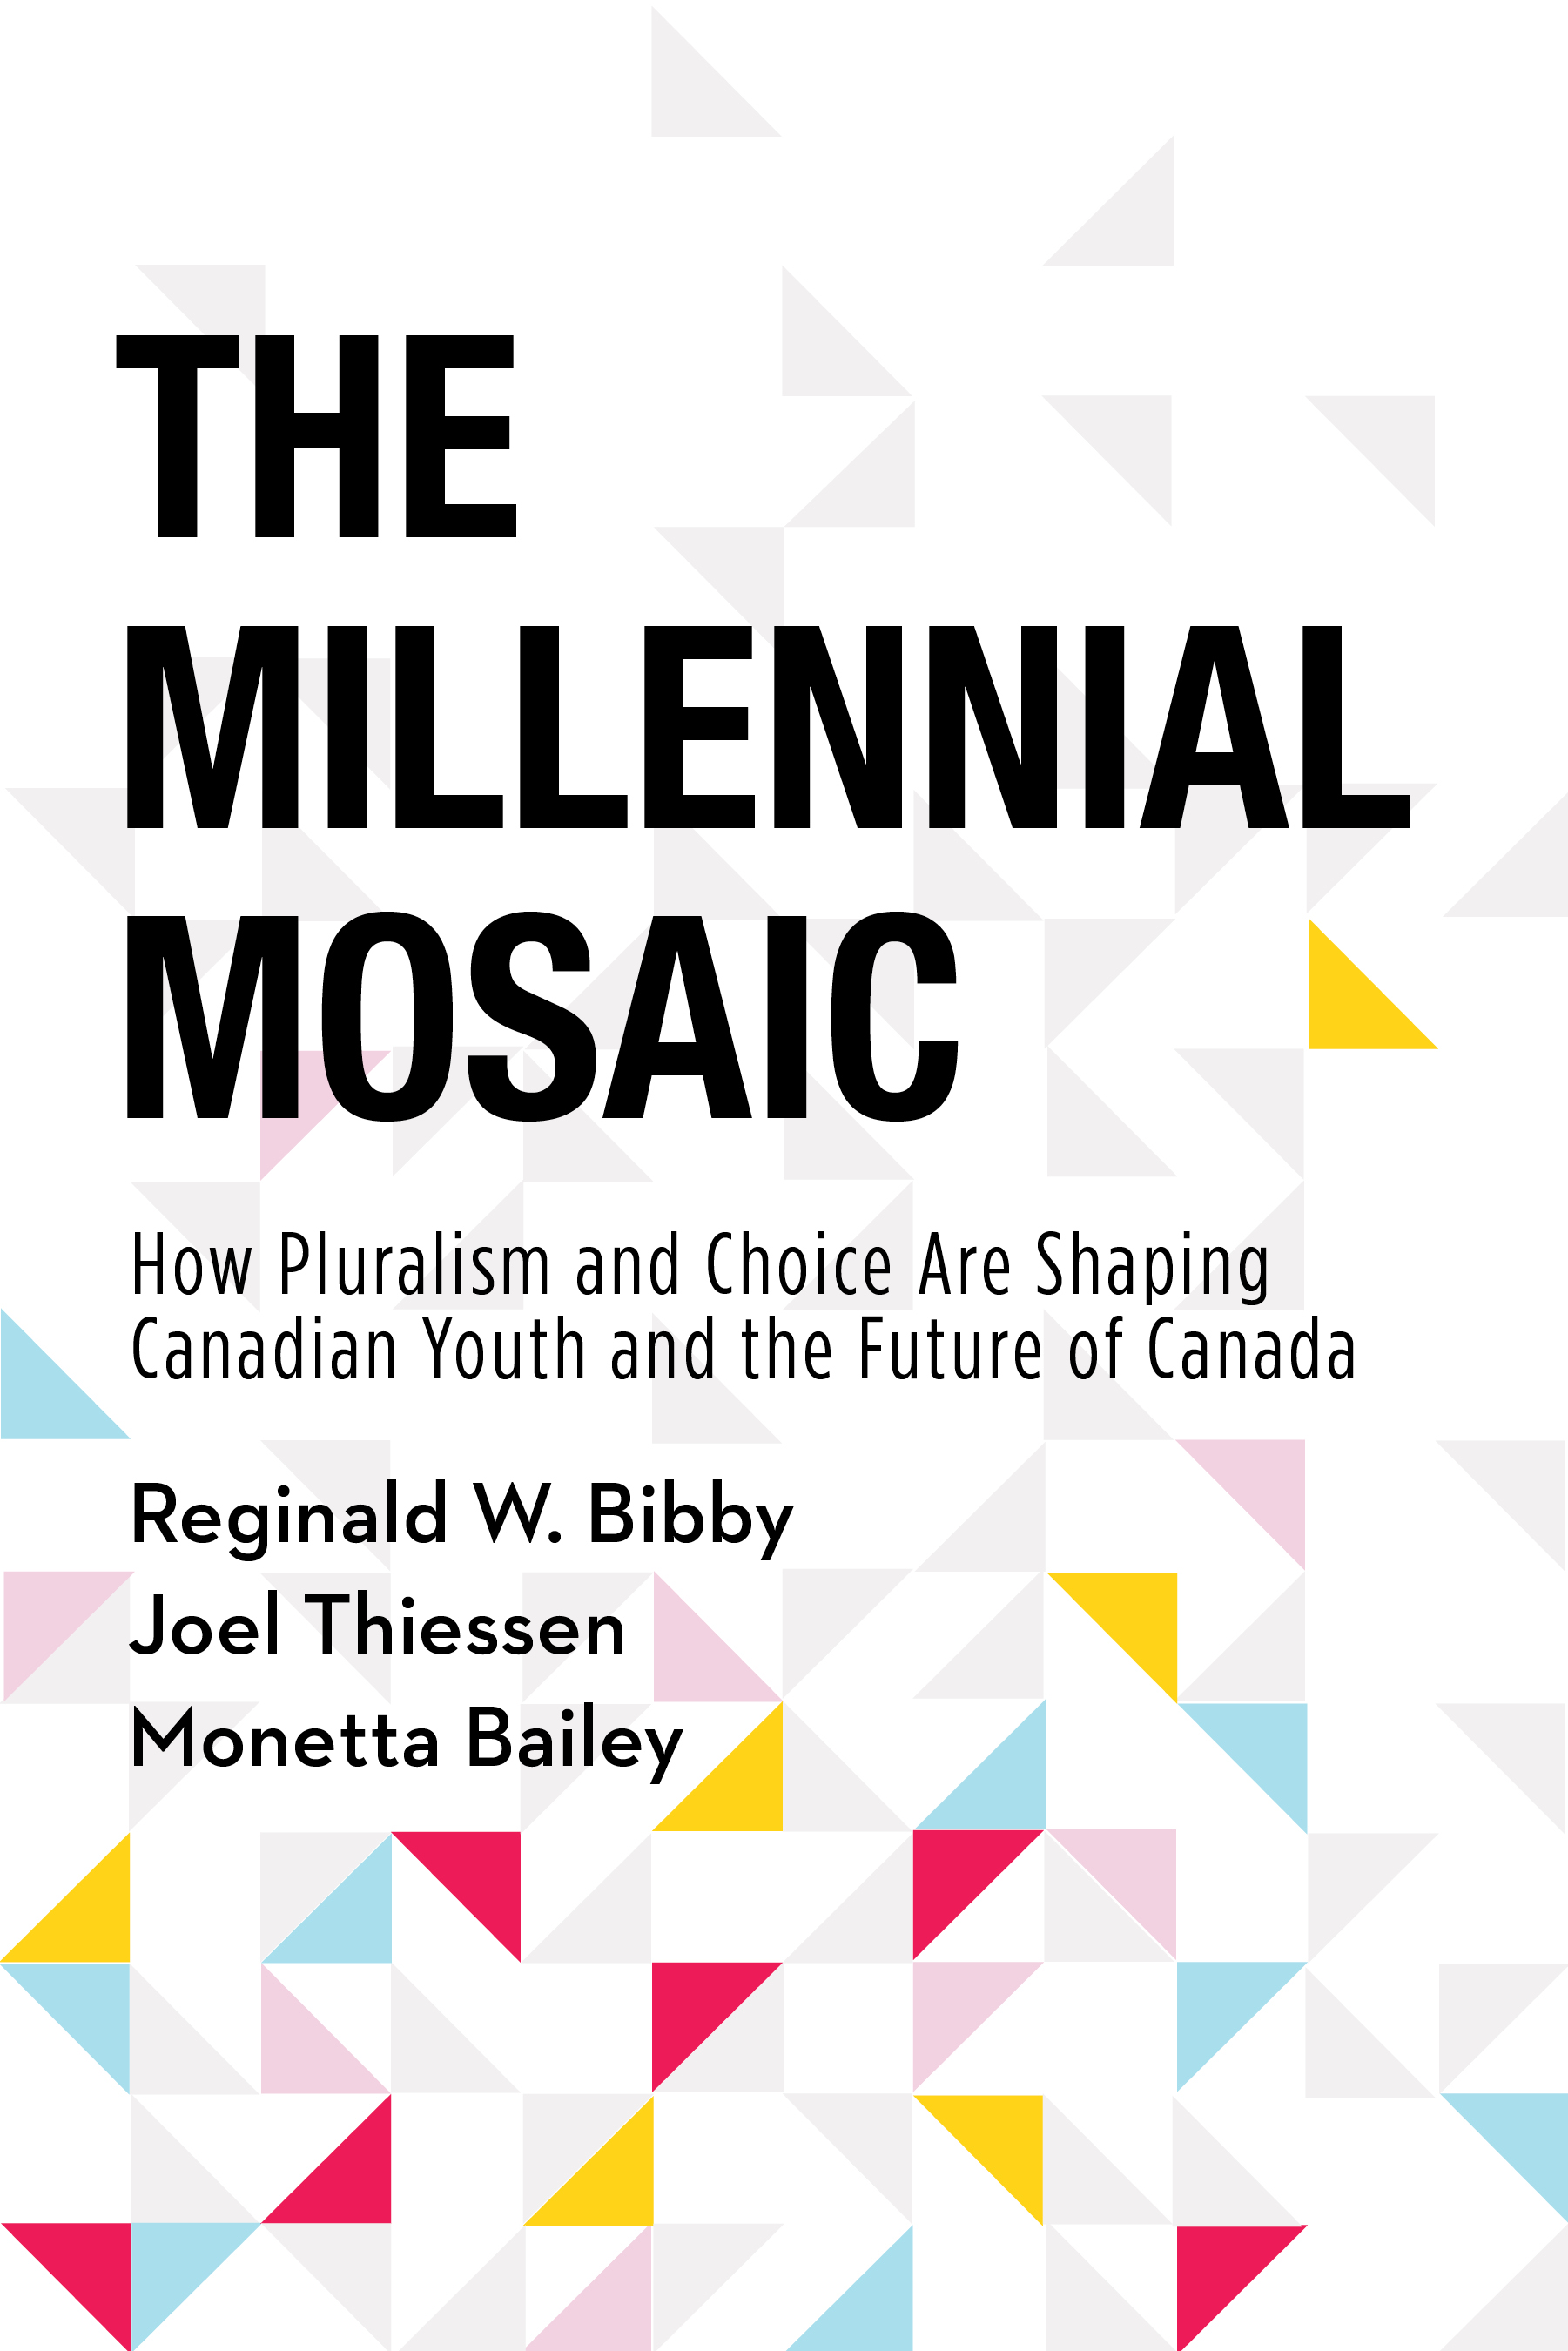 MILLENNIAL MOSAIC: HOW PLURALISM AND CHOICE ARE SHAPING CANADIAN YOUTH AND THE FUTURE OF CANADA, by BIBBY, REGINALD